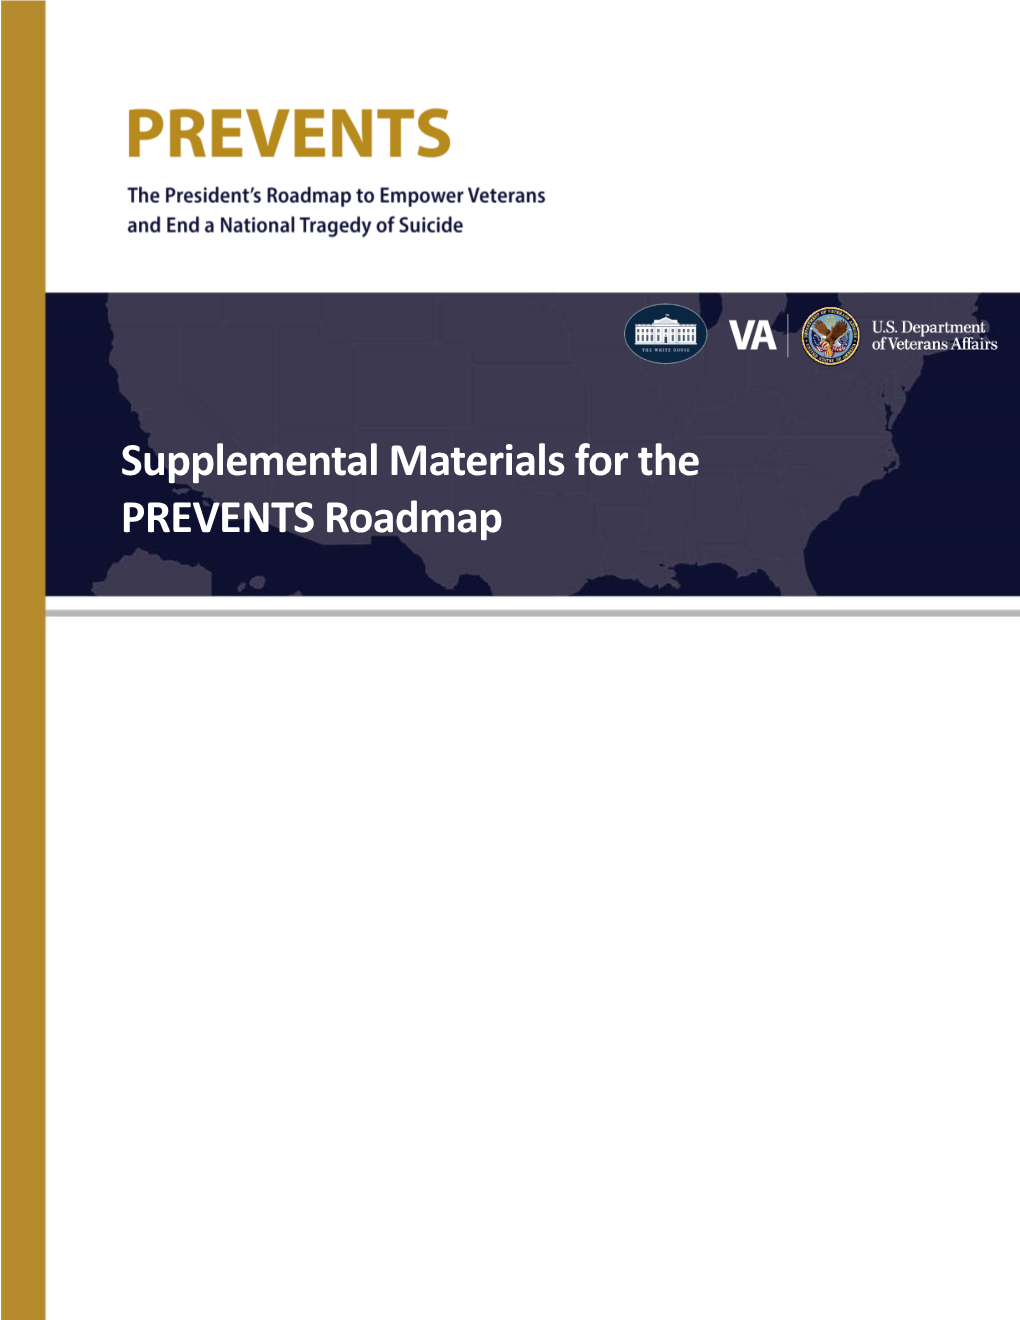 Supplemental Materials for the PREVENTS Roadmap